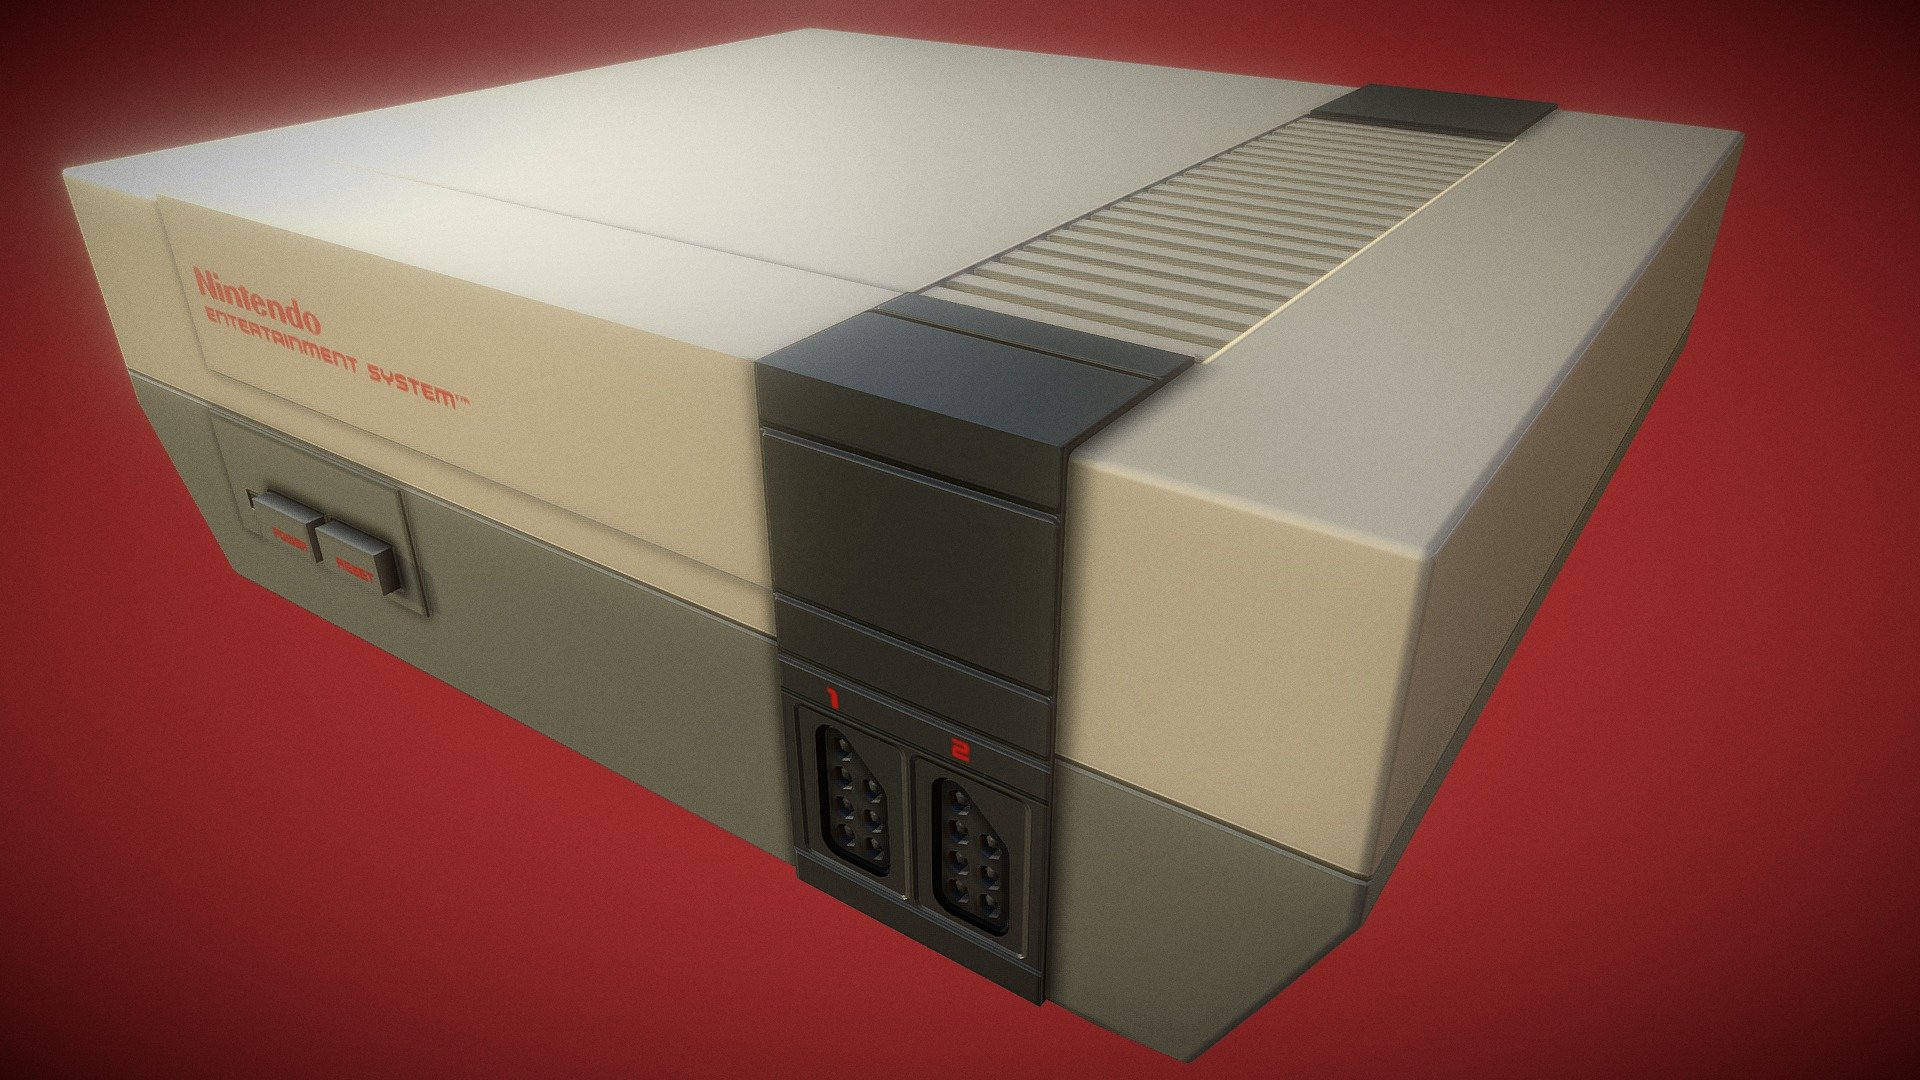 The NES was released after the &ldquo;video game crash